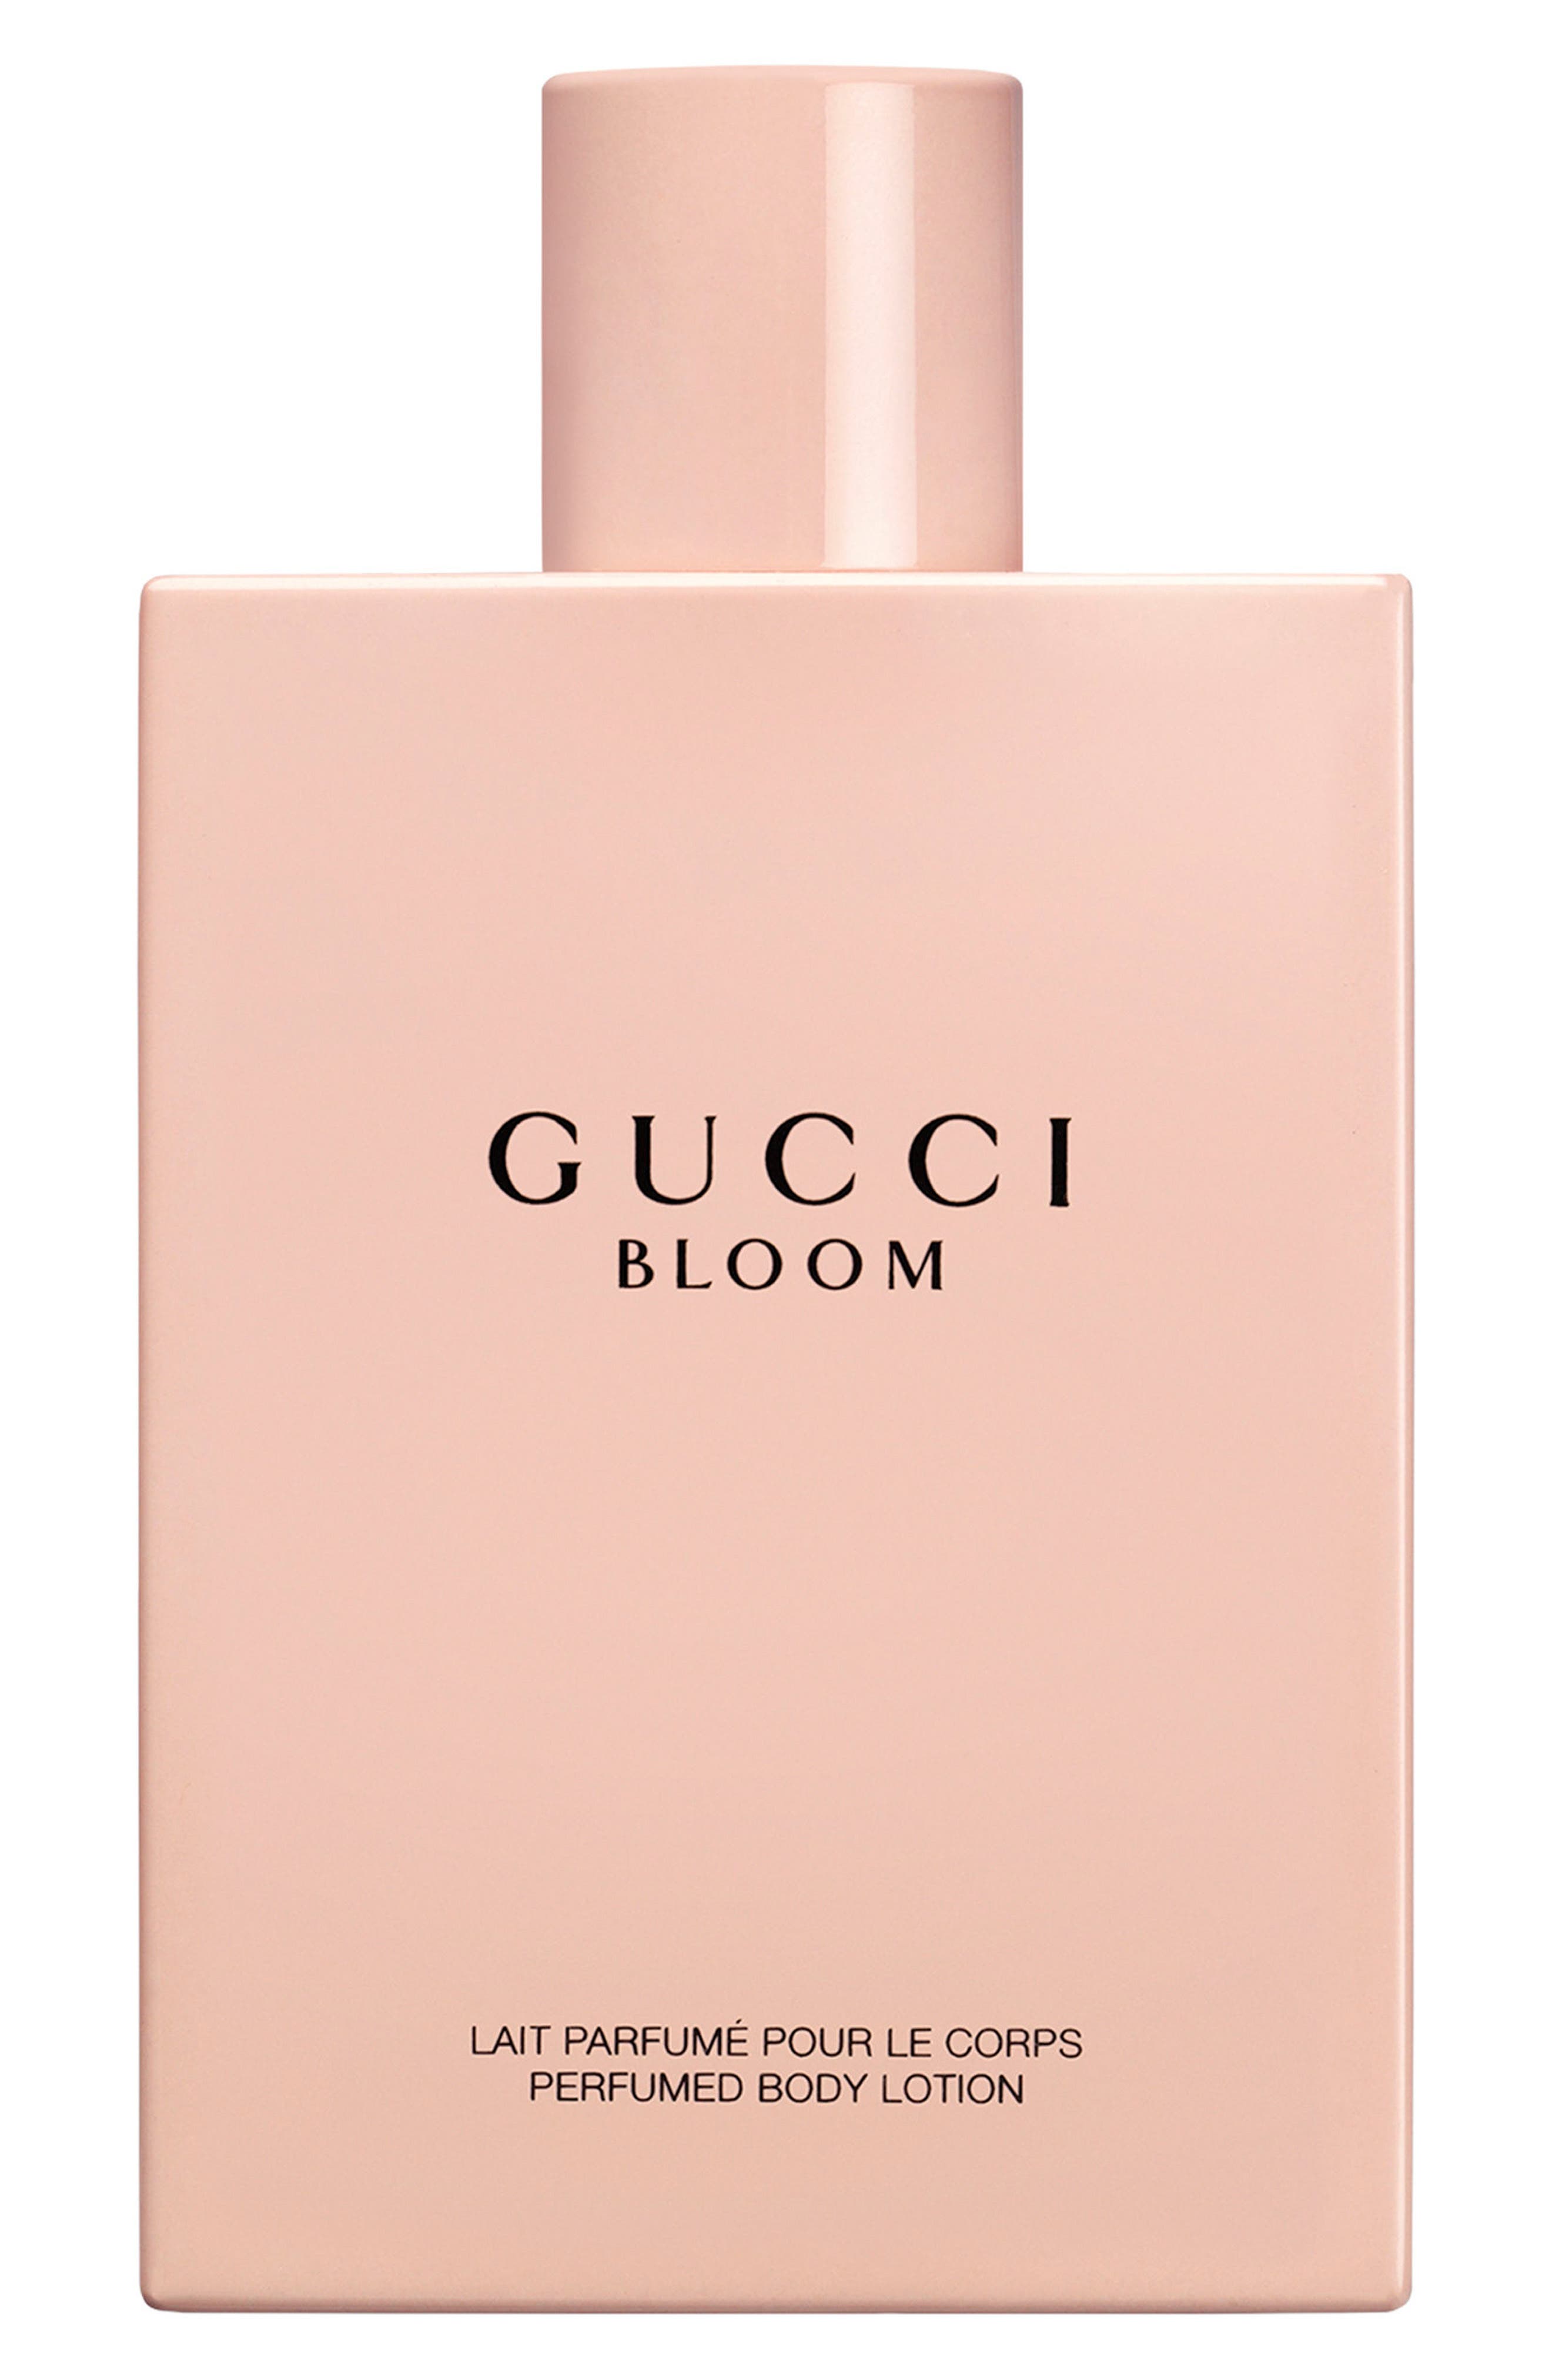 EAN 8005610481487 product image for Gucci Bloom Body Lotion | upcitemdb.com